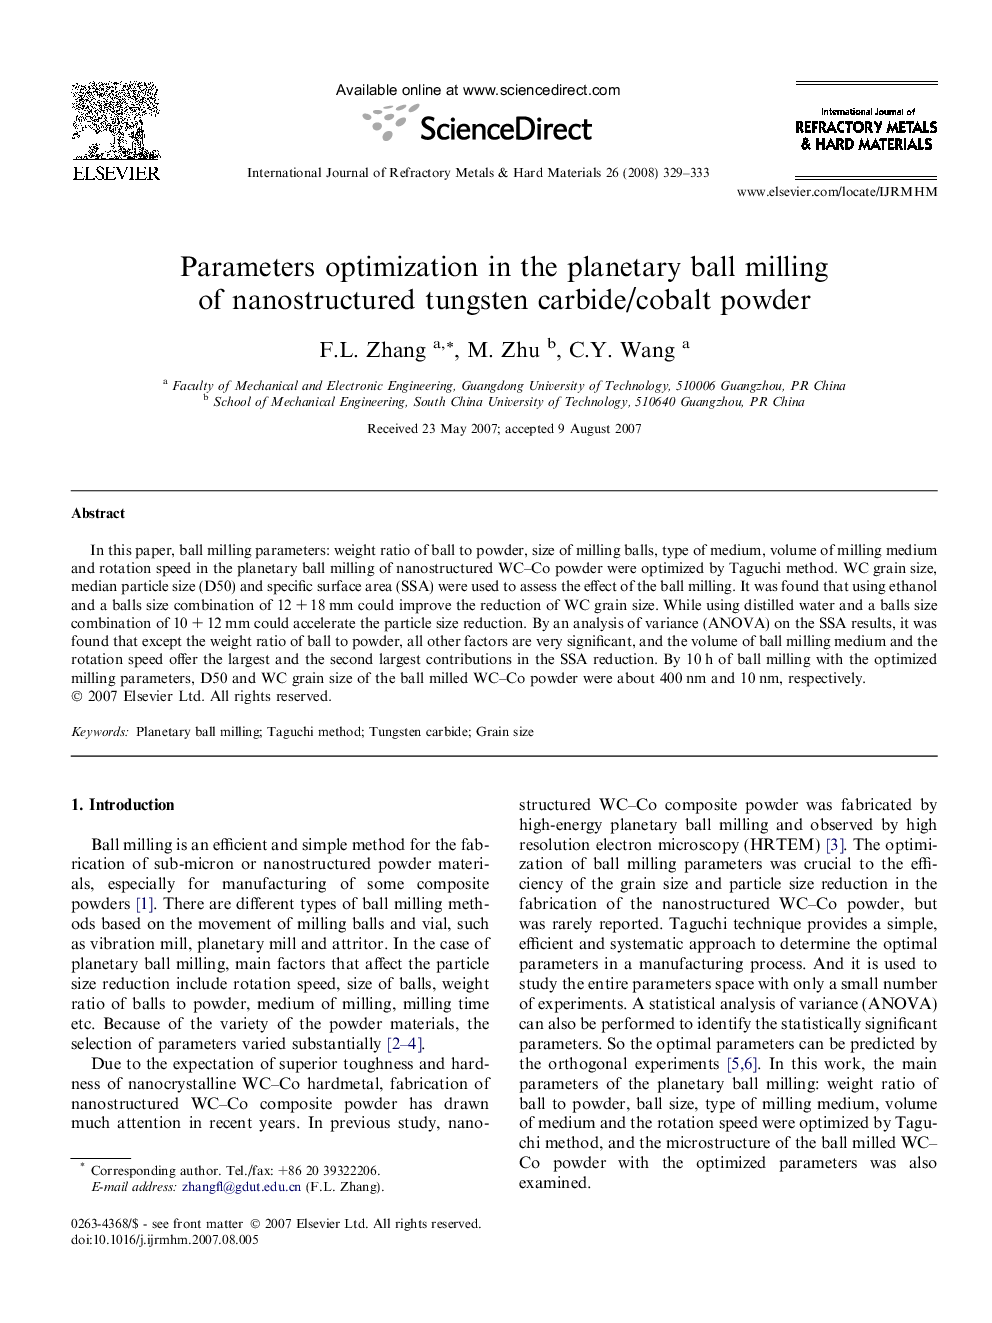 Parameters optimization in the planetary ball milling of nanostructured tungsten carbide/cobalt powder